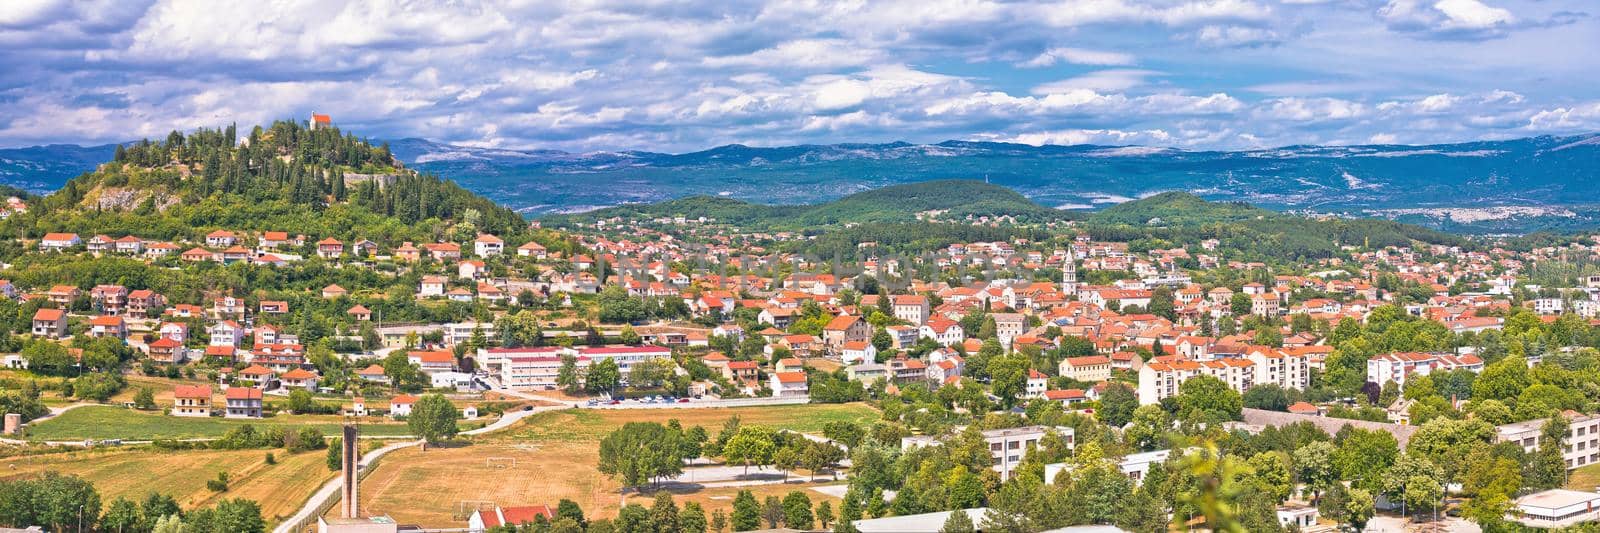 Sinj. Town of Sinj panoramic view by xbrchx